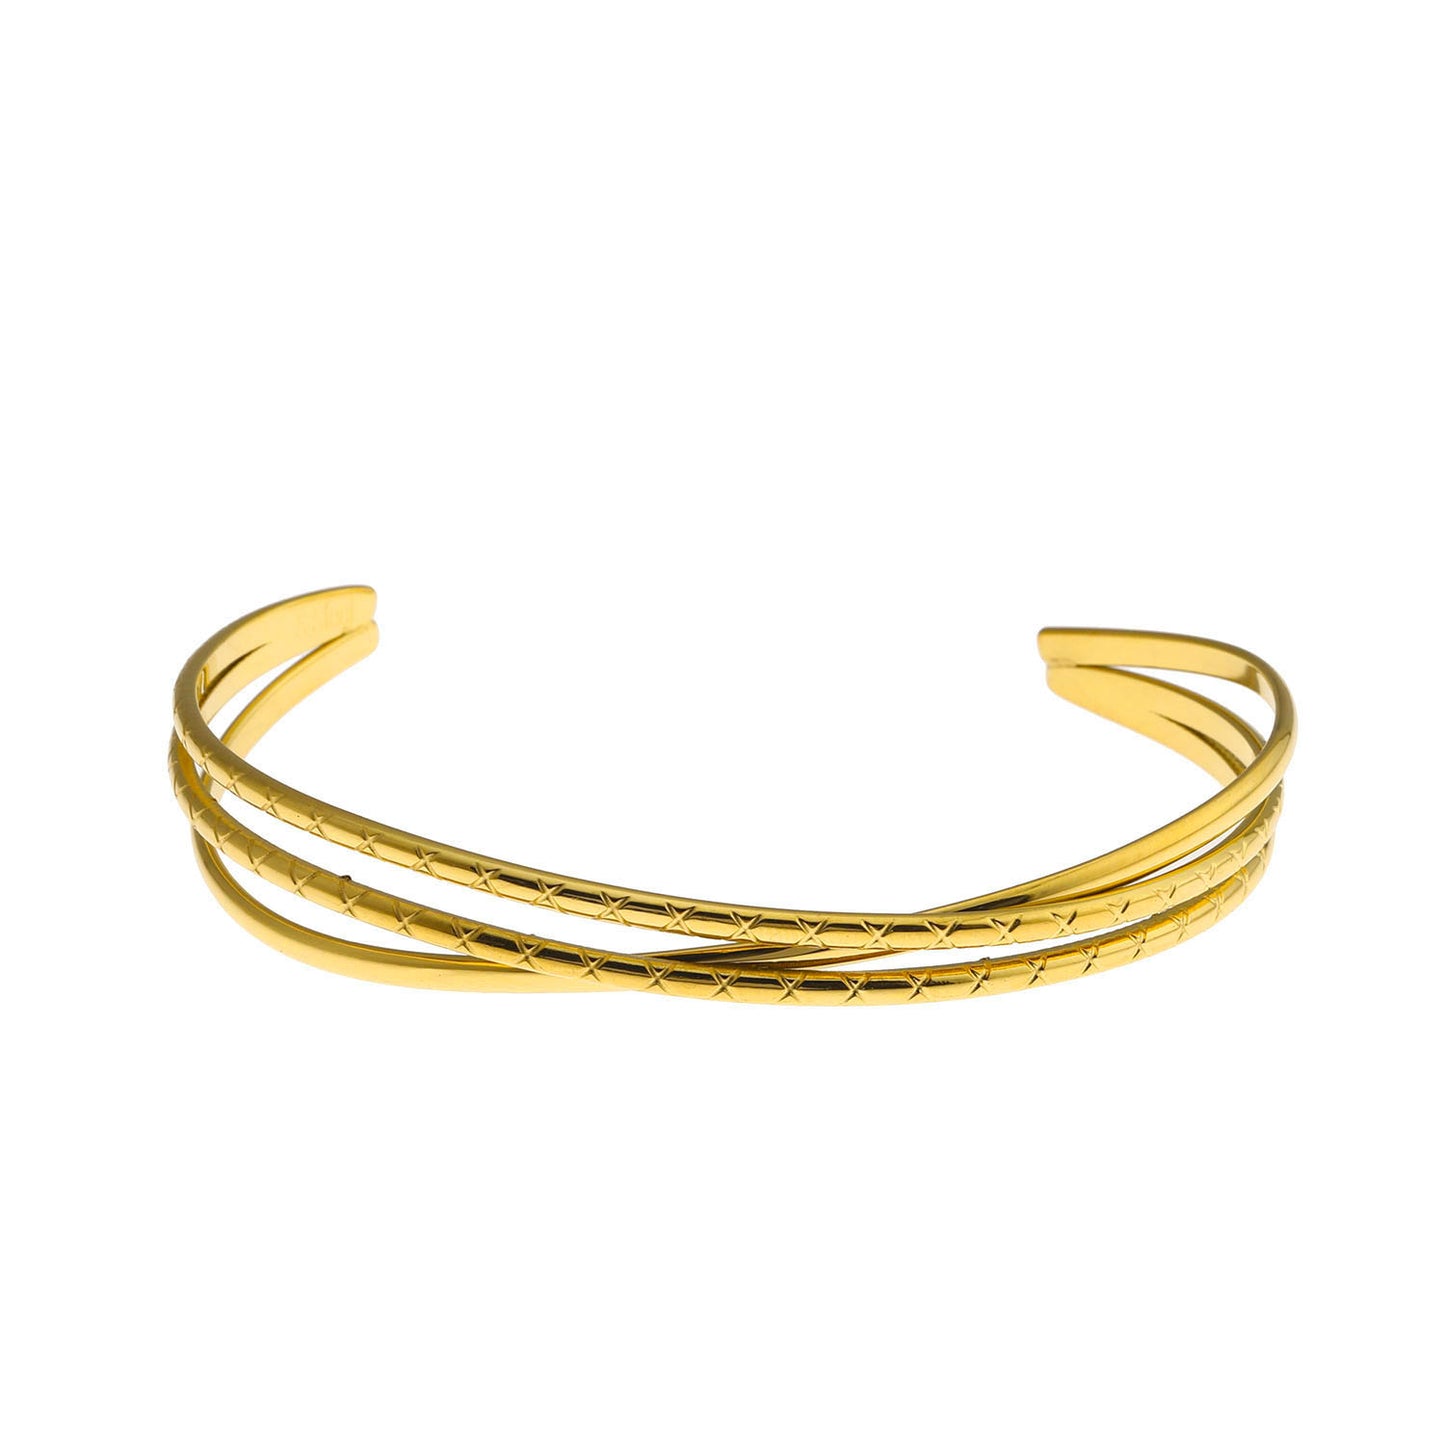 Style: RENIE 221136 Layered Overpass Bracelet with Surface Notch Design.